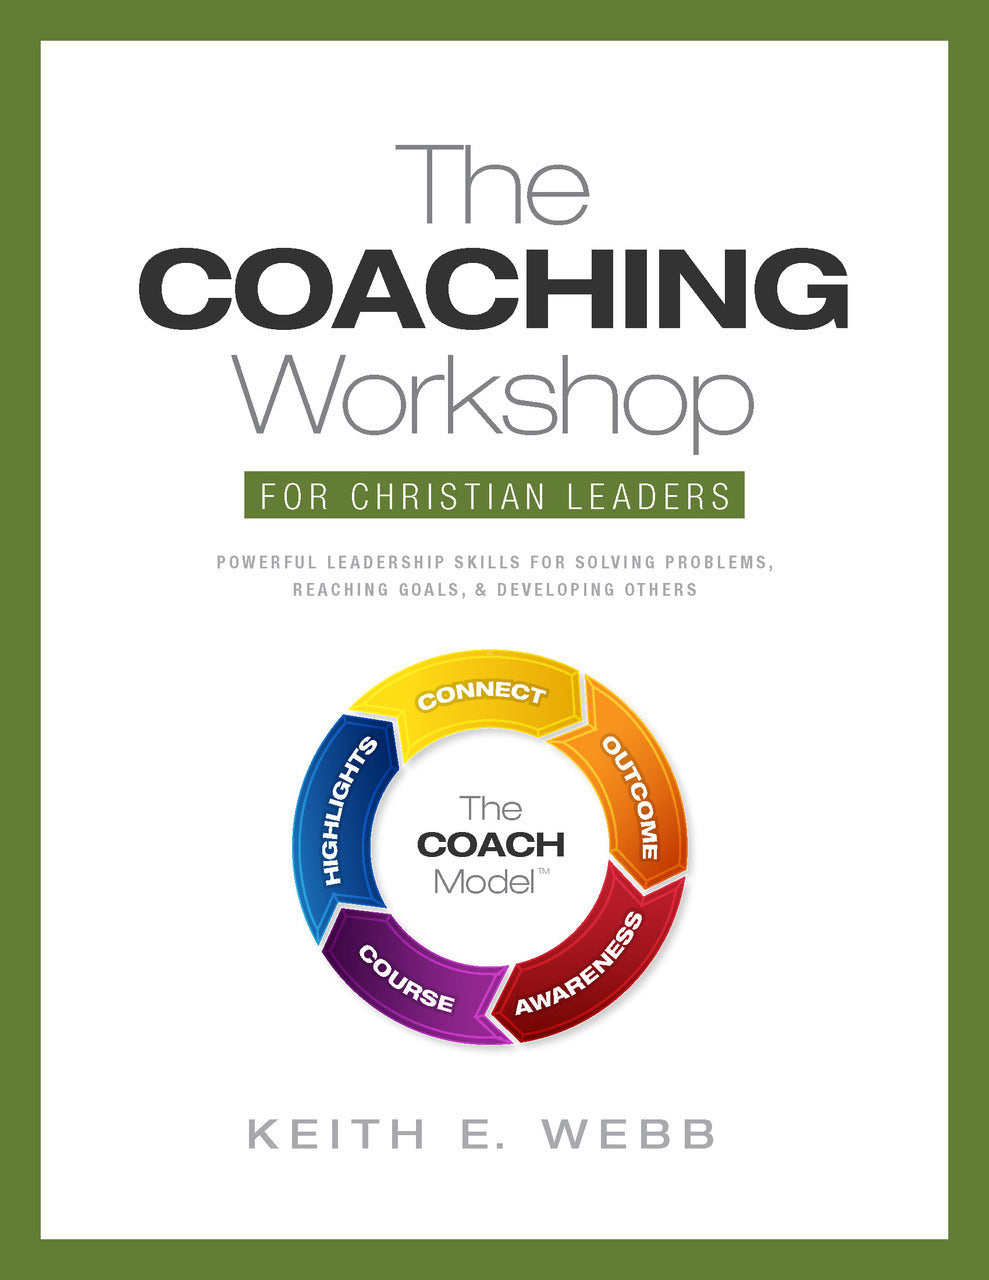 COACHING Workshop for Christian Leaders License